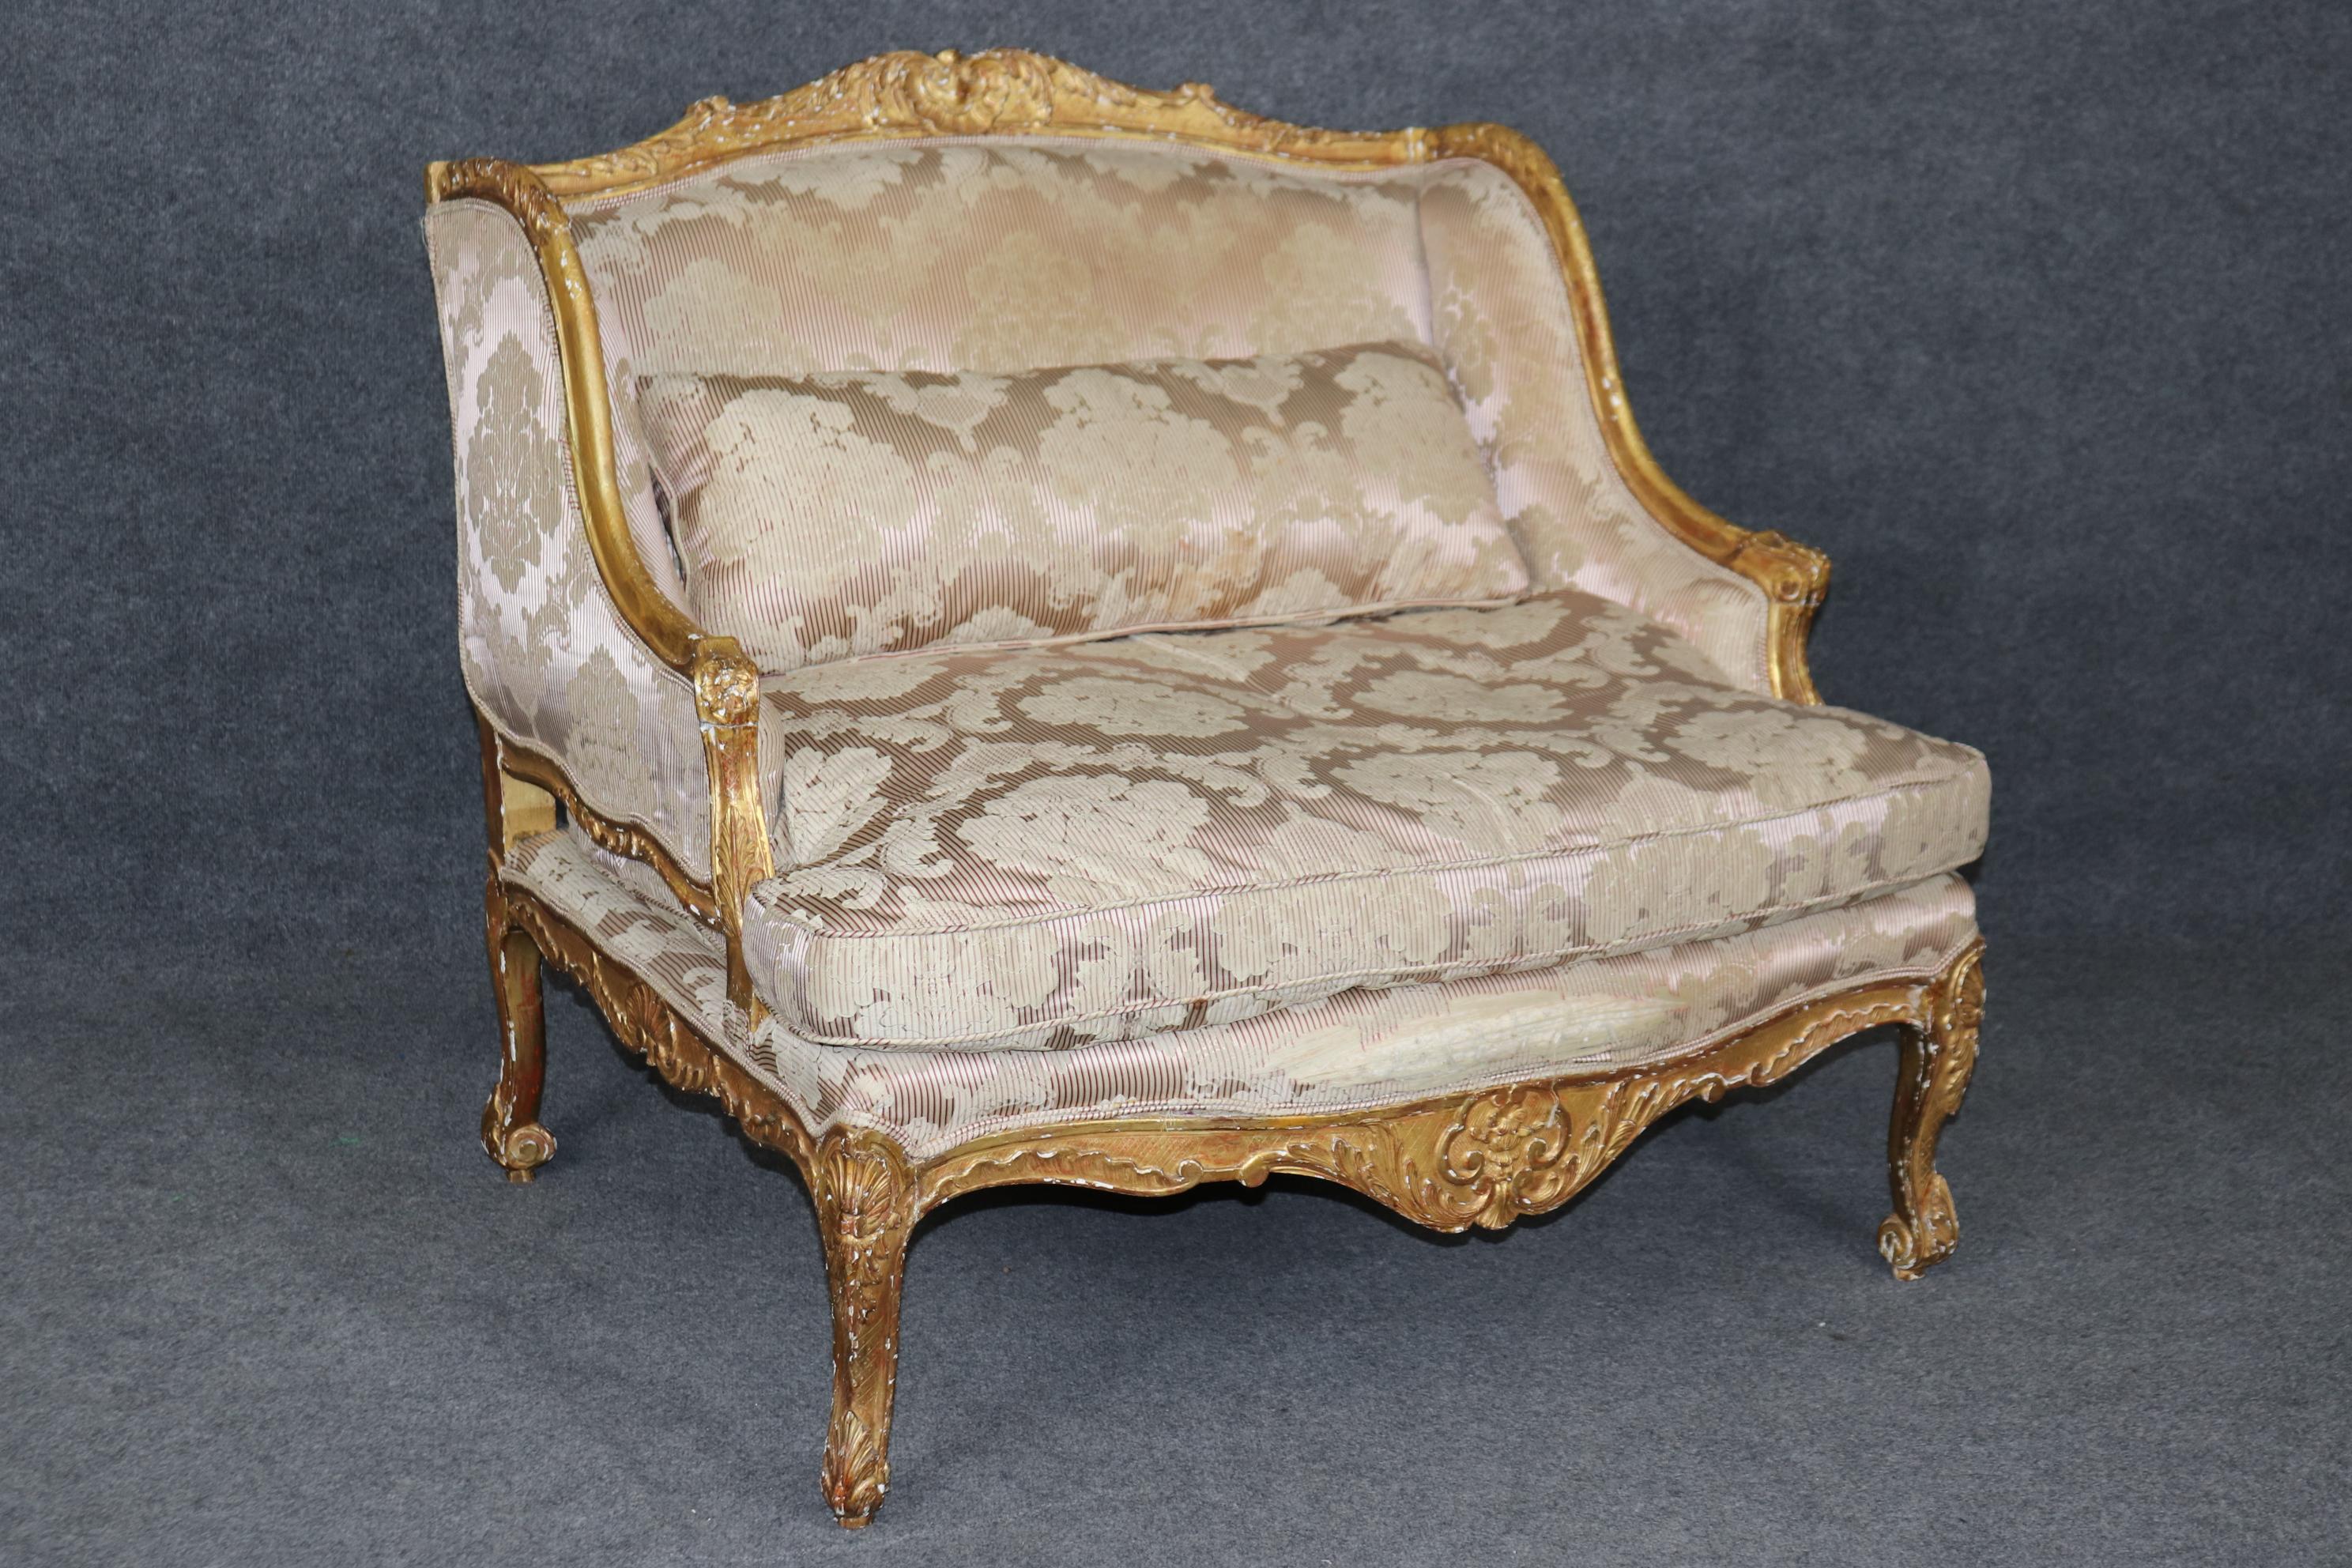 Ok, this is a superb frame, the frame is expertly carved and gilded in bright gold leaf that's genuine gold. The frame is substantially wider than a typical bergere chair and the finish has its beautiful finish and signs of age including chips,